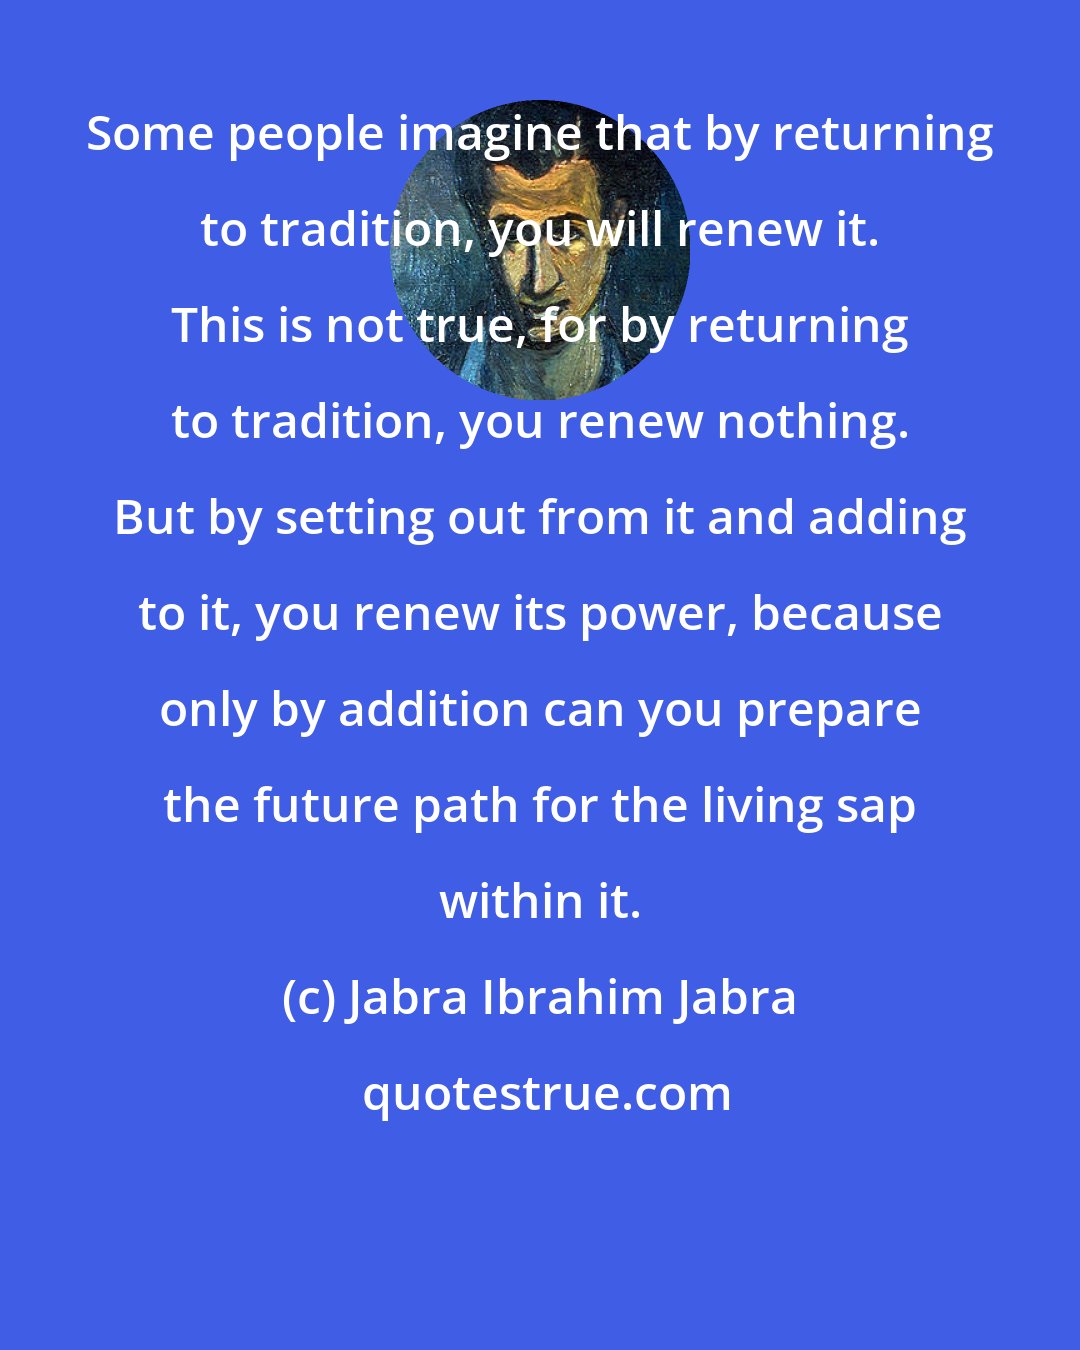 Jabra Ibrahim Jabra: Some people imagine that by returning to tradition, you will renew it. This is not true, for by returning to tradition, you renew nothing. But by setting out from it and adding to it, you renew its power, because only by addition can you prepare the future path for the living sap within it.